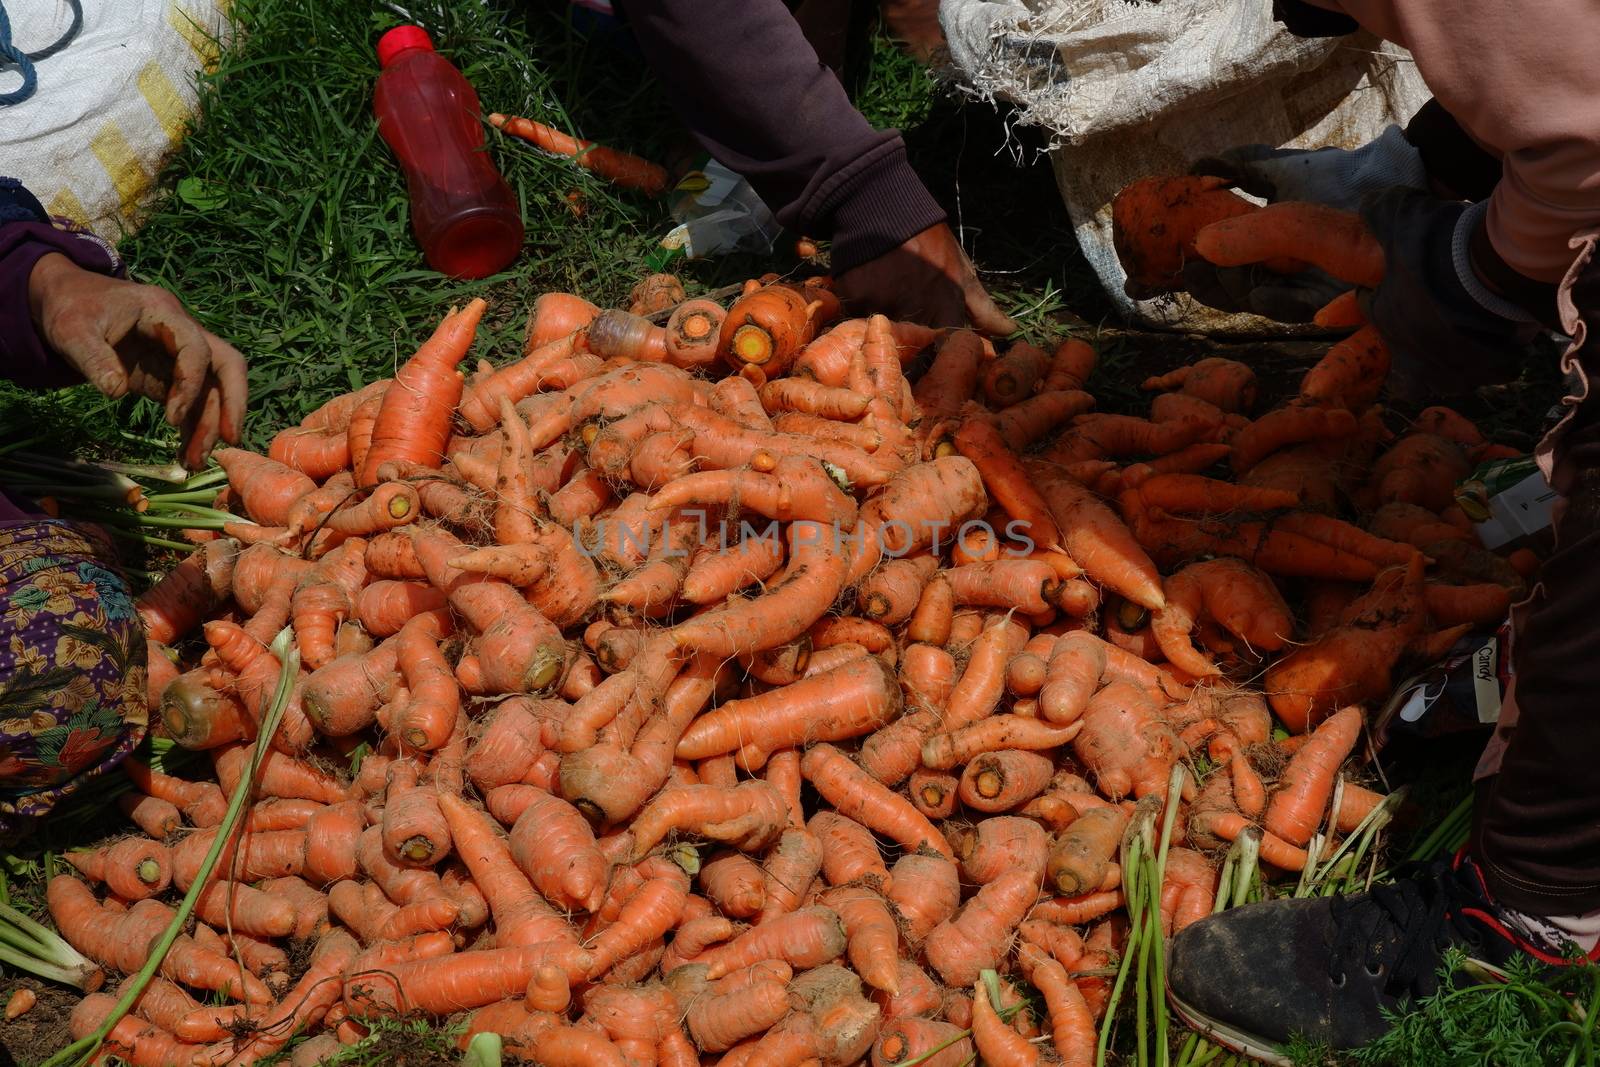 close up image of farmers harvest carrots in the fields, separate the carrots from the leaves and put them in sacks, harvest big carrots and tie them. out of focus